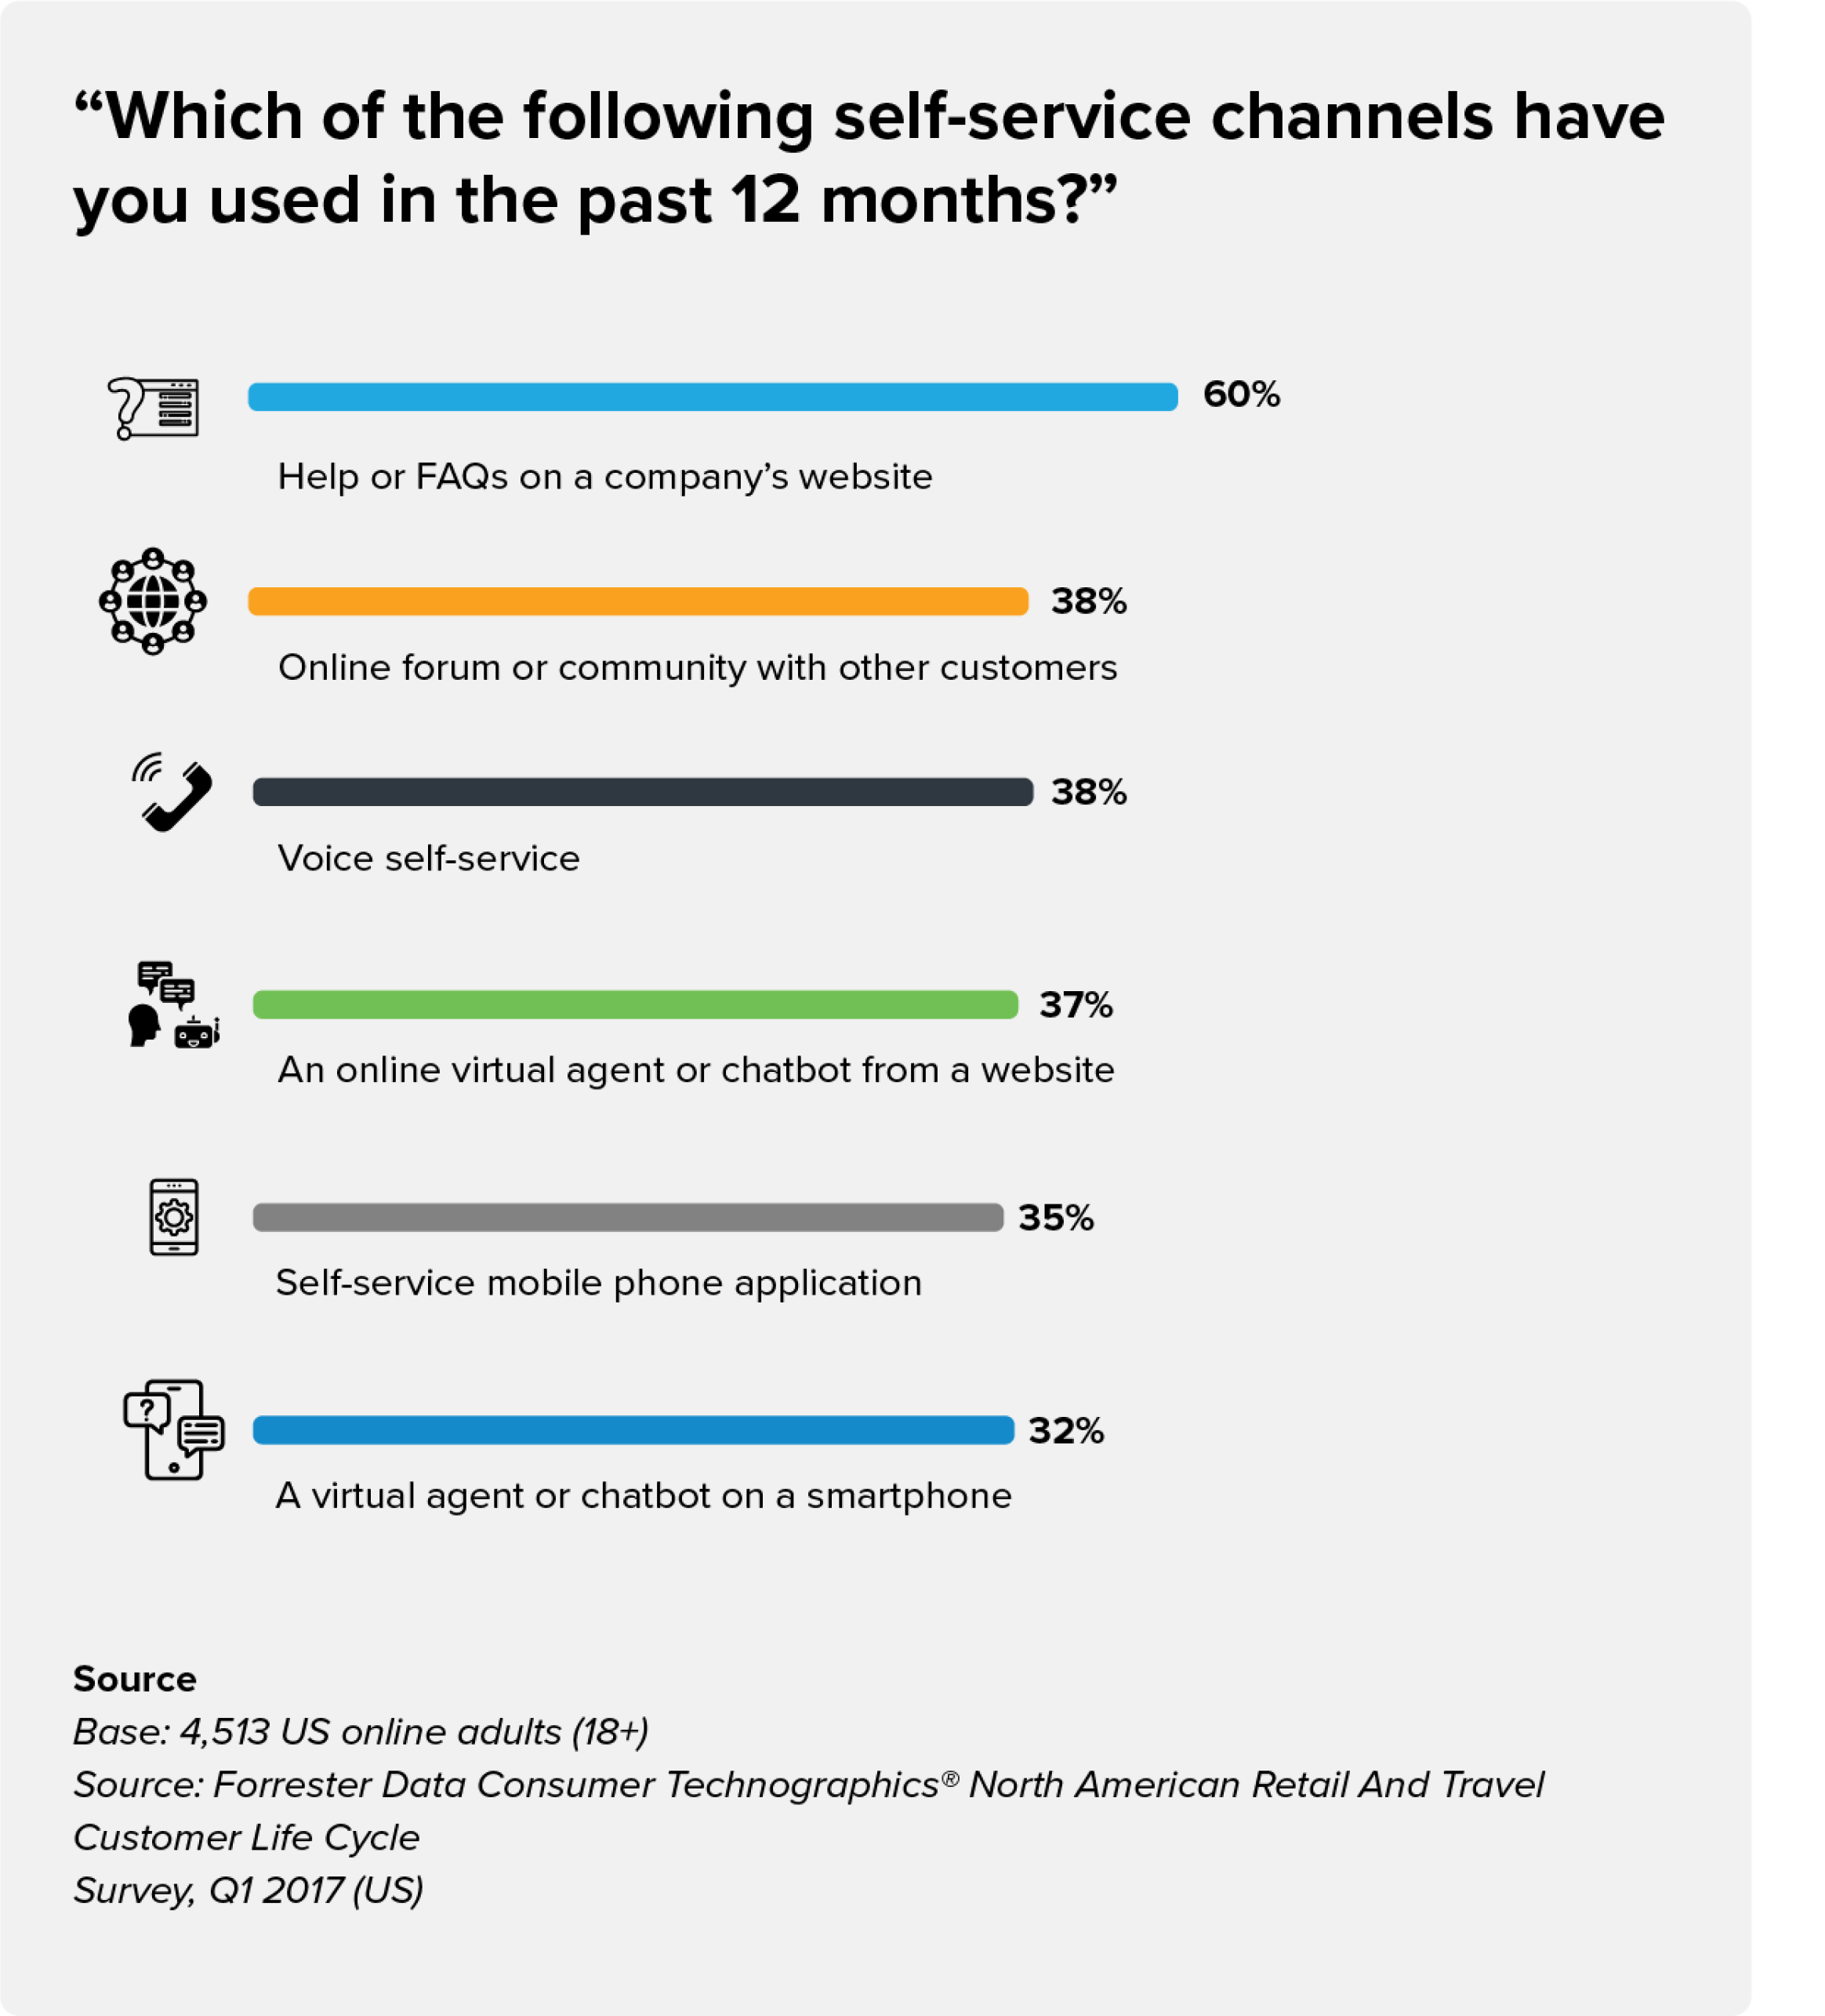 A graphic representing the popular self-service channels that customers used in the past 12 months. Help and FAQ sections lead with 60%, followed by online communities and voice self-service with 38%.